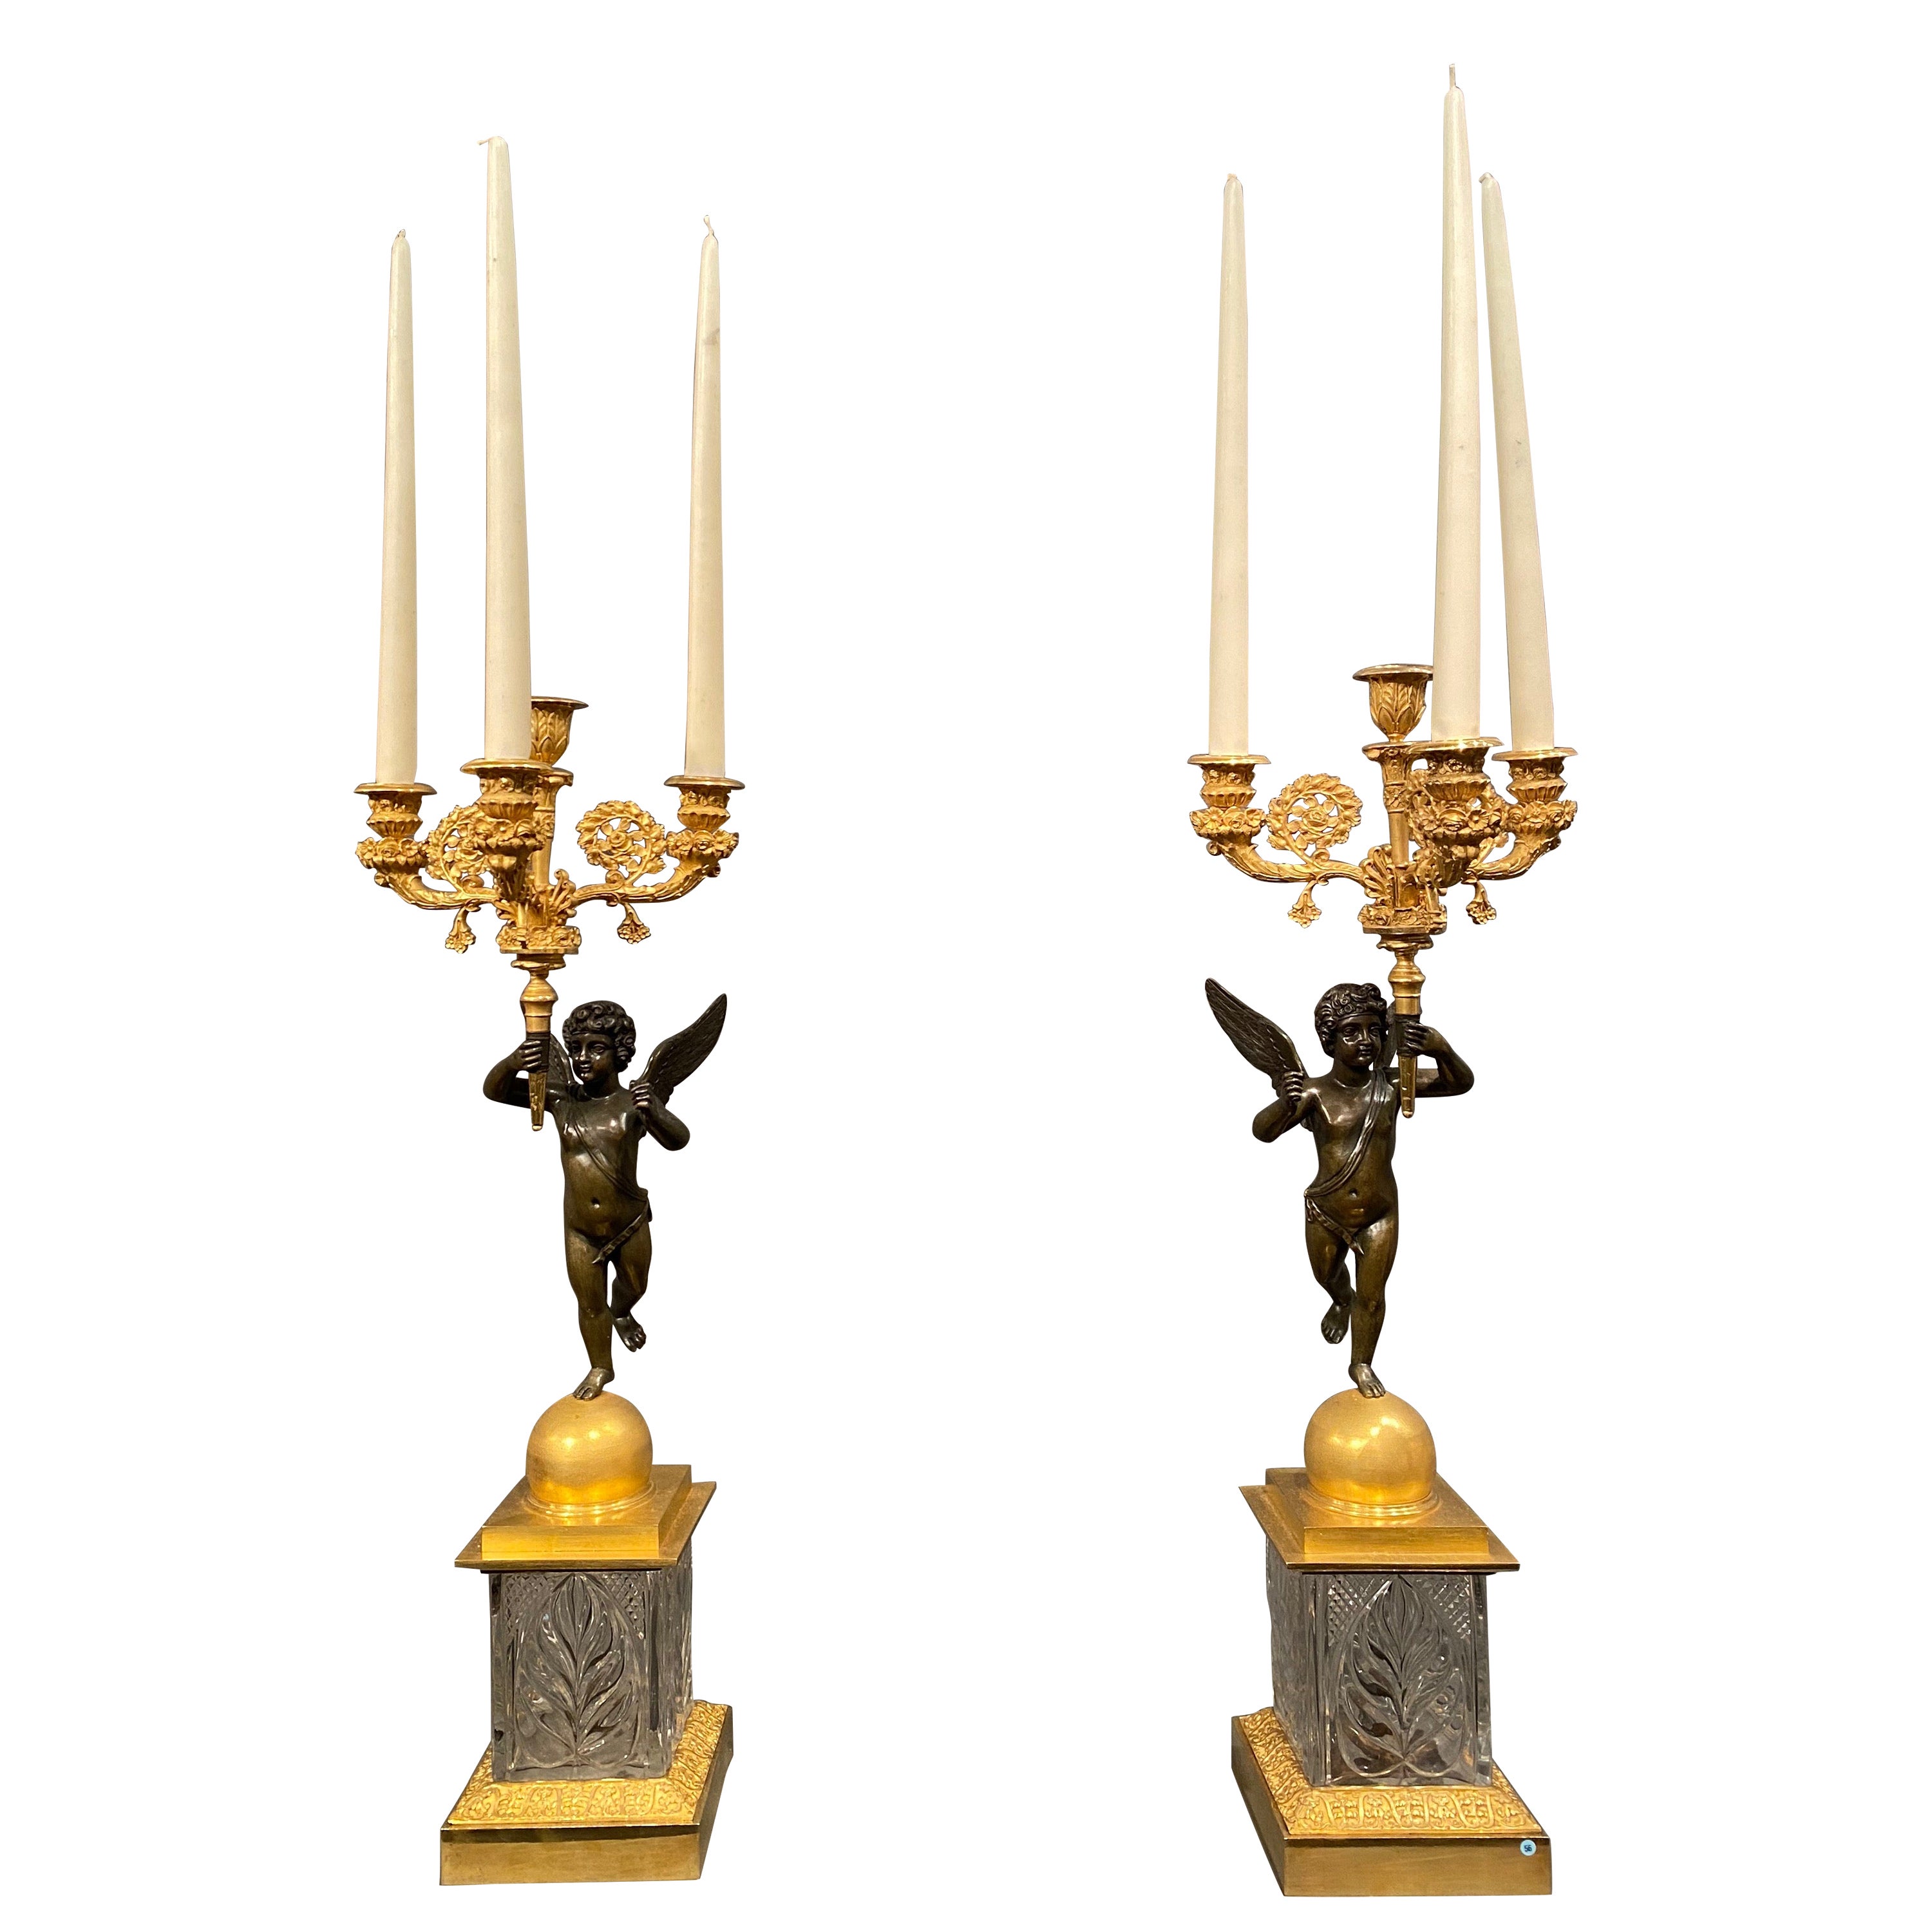 These pair of candelabra are very unusual with the cut crystal bases. Glass was one of the most expensive materials in these times and therefore exclusive. The usual way you see these type of candelabra is with a gilt or patinated bronze base. The